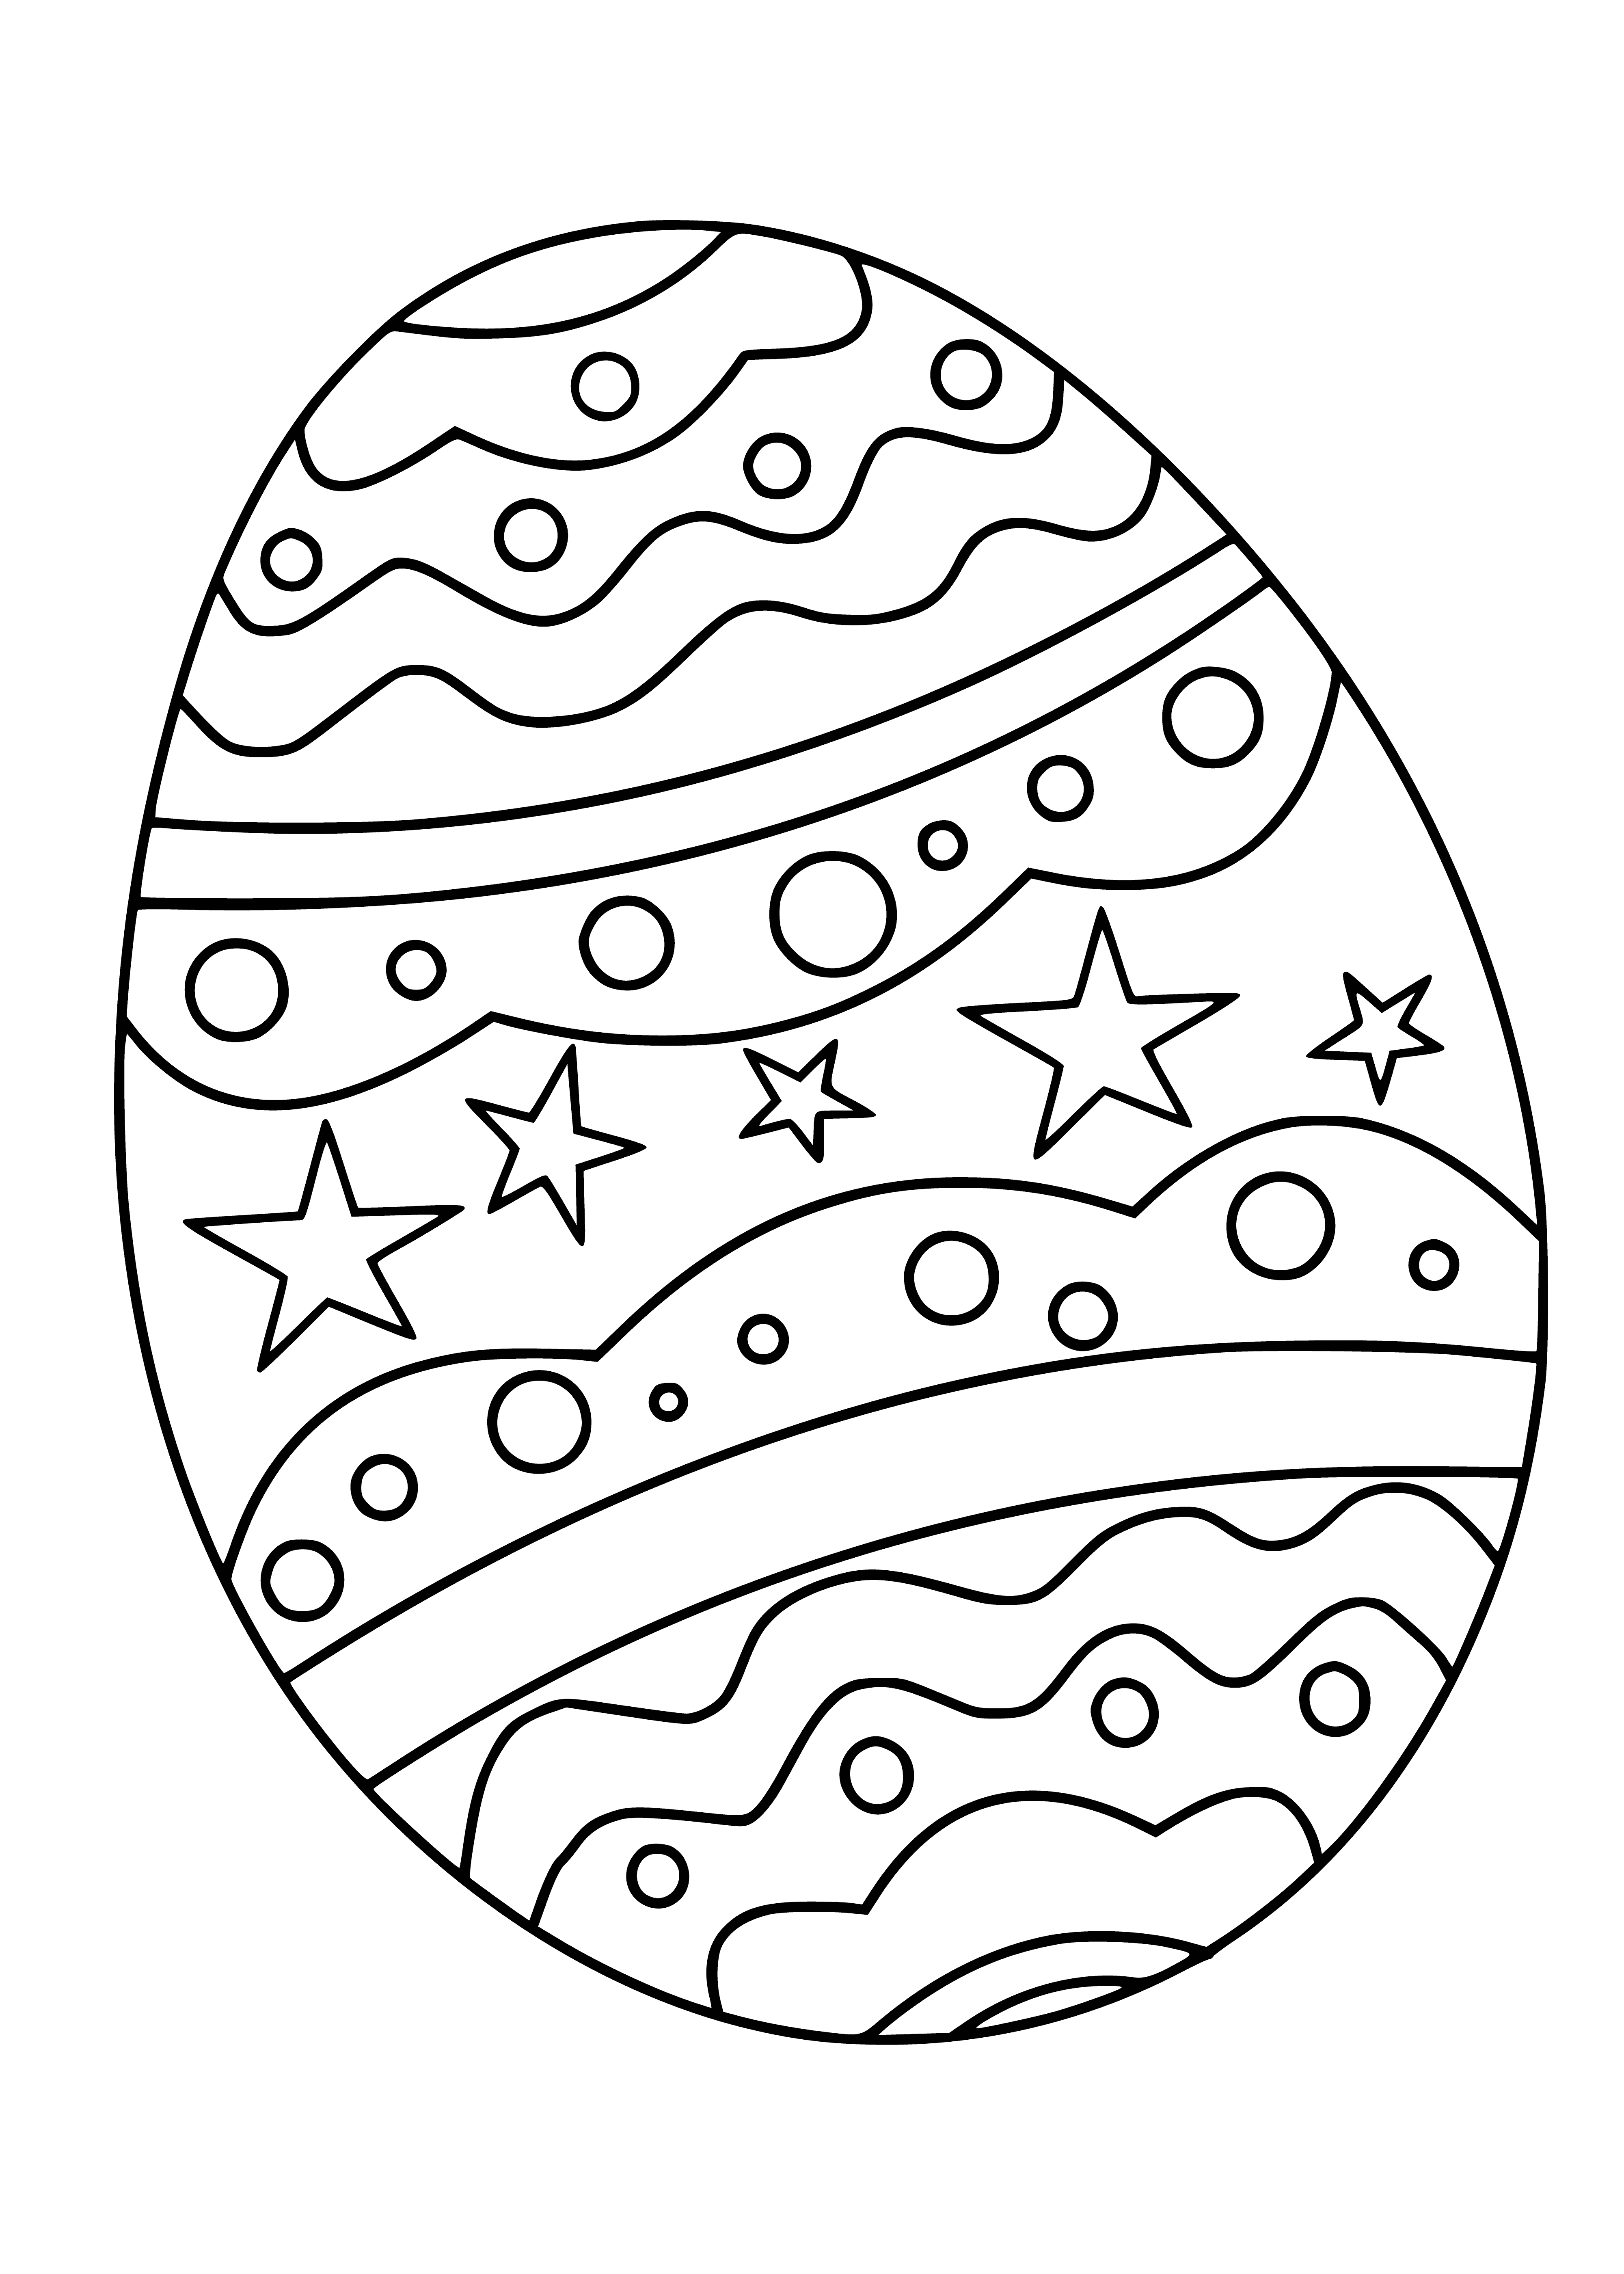 coloring page: Basket of Easter eggs in brown, blue, & yellow colors -- fun for kids! #EasterFun